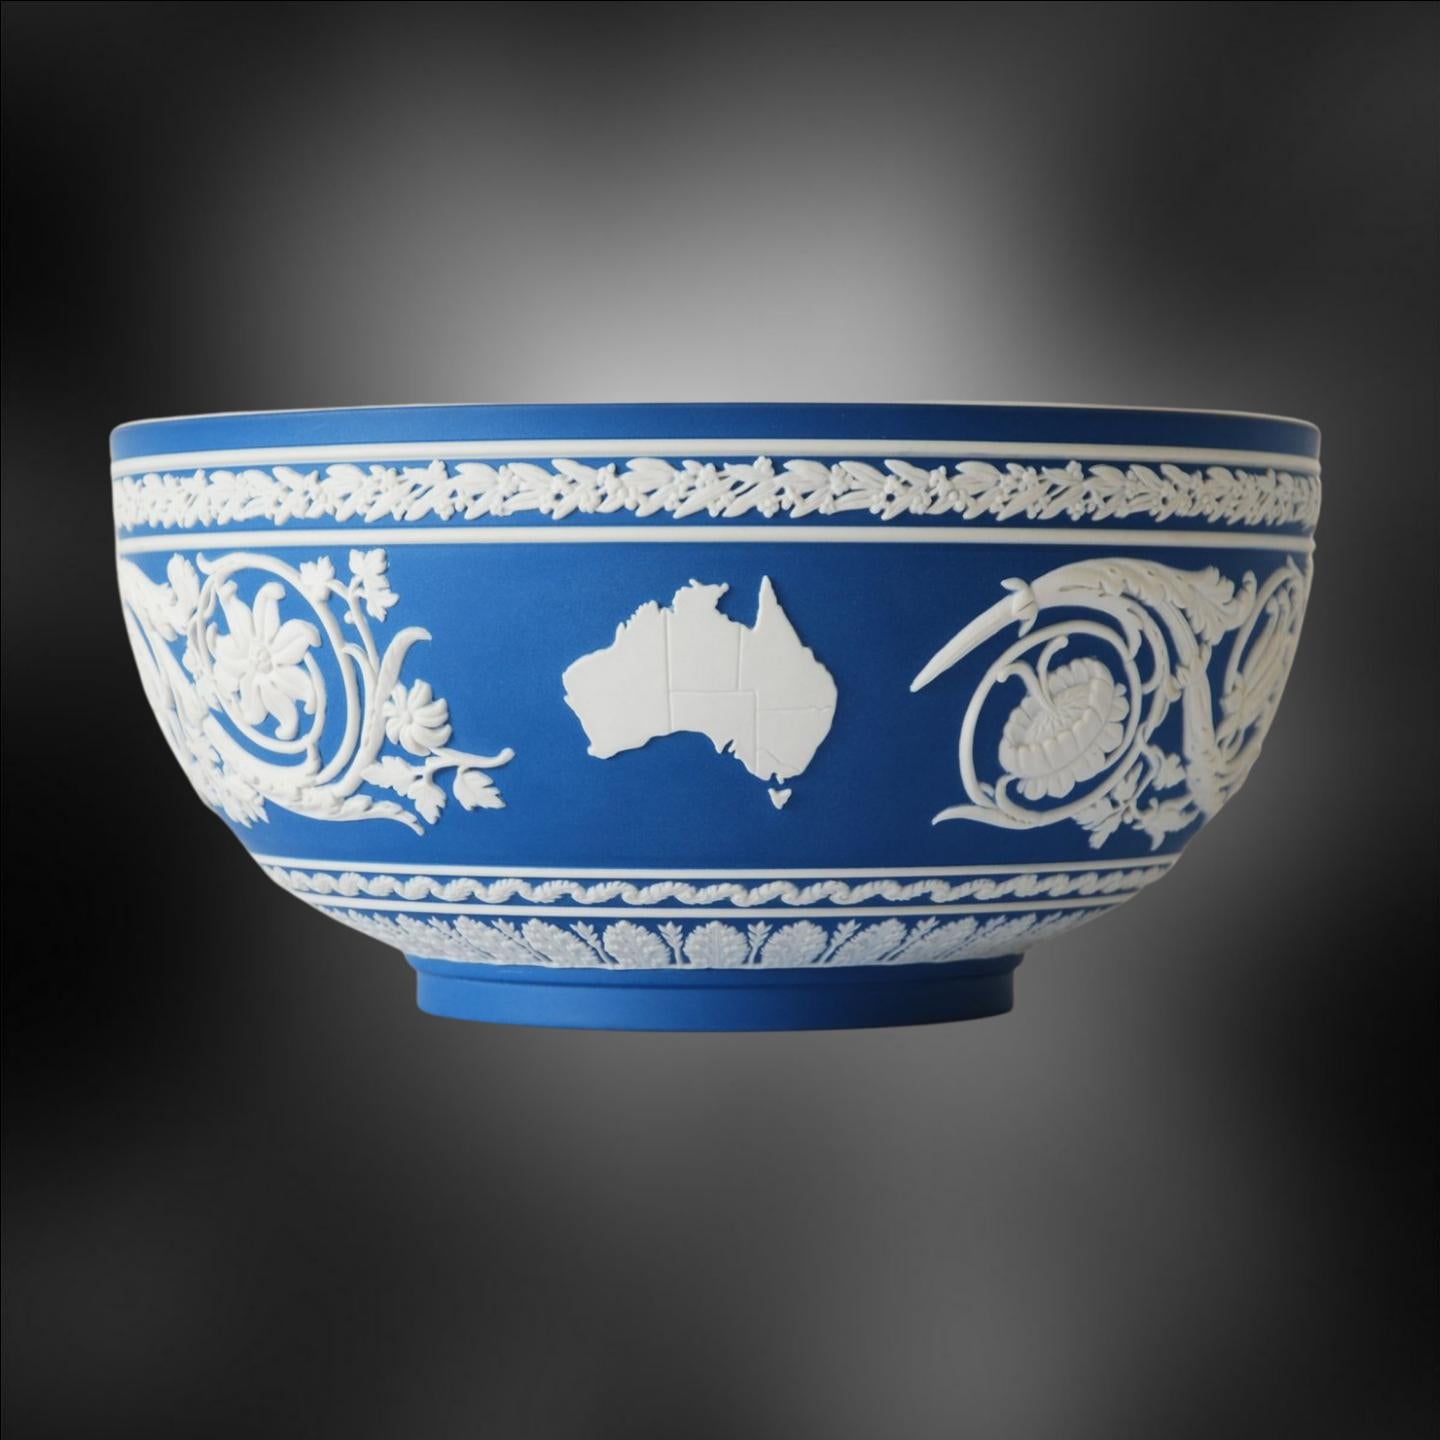 Stoneware Australian Bicentenary Bowl, Wedgwood, circa 1988. Number 10 of 50 Made For Sale